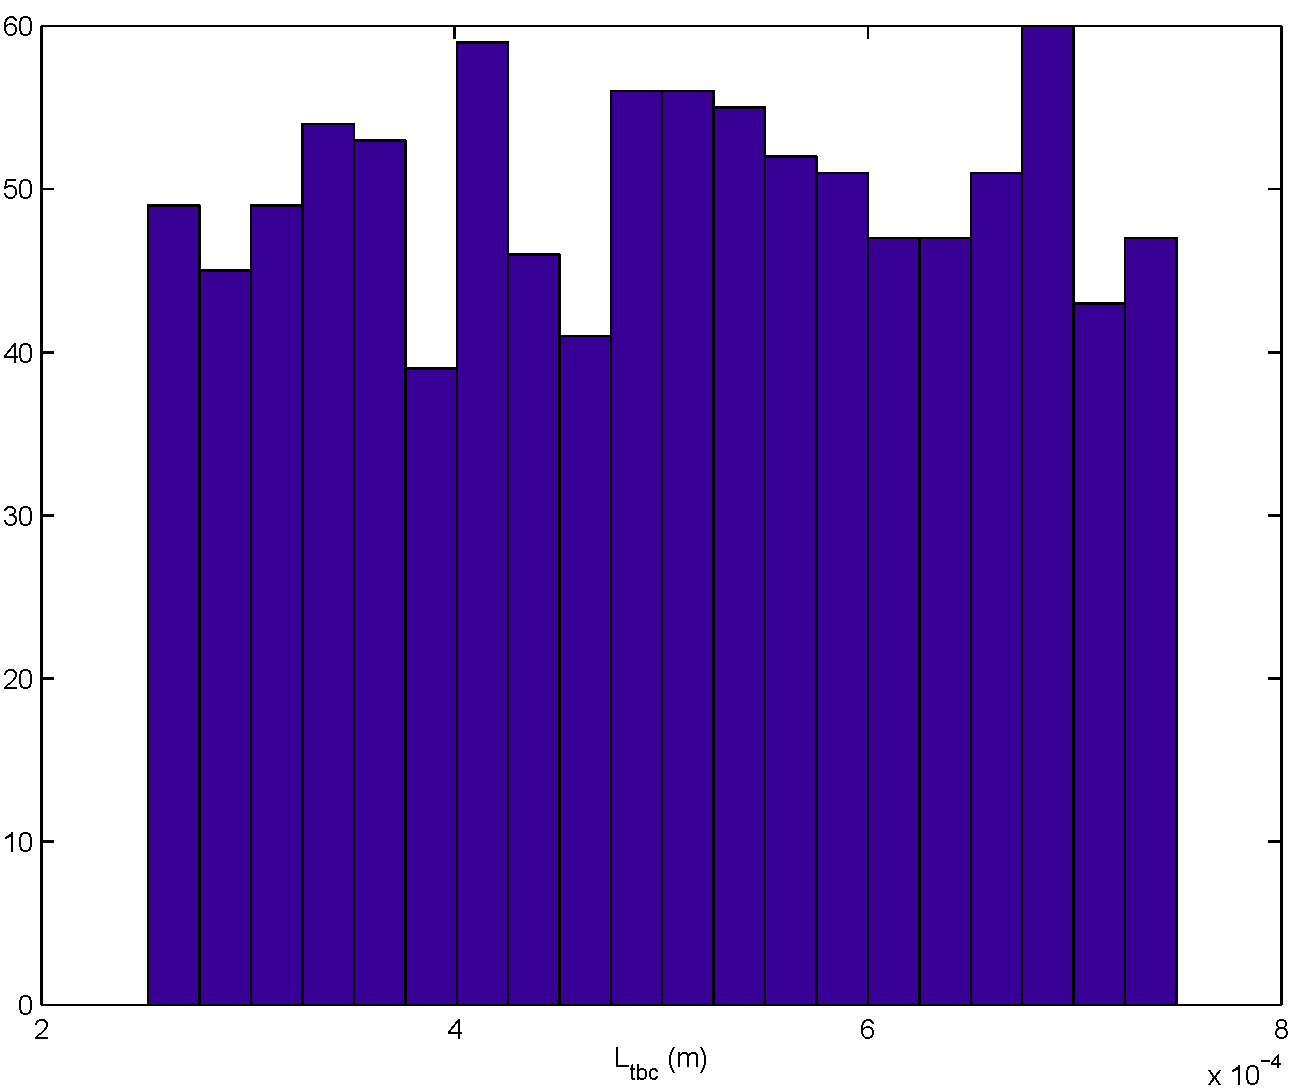 The figure is a histogram of a random sample from a uniformly-distributed LTBC for a sample size of N=1000.